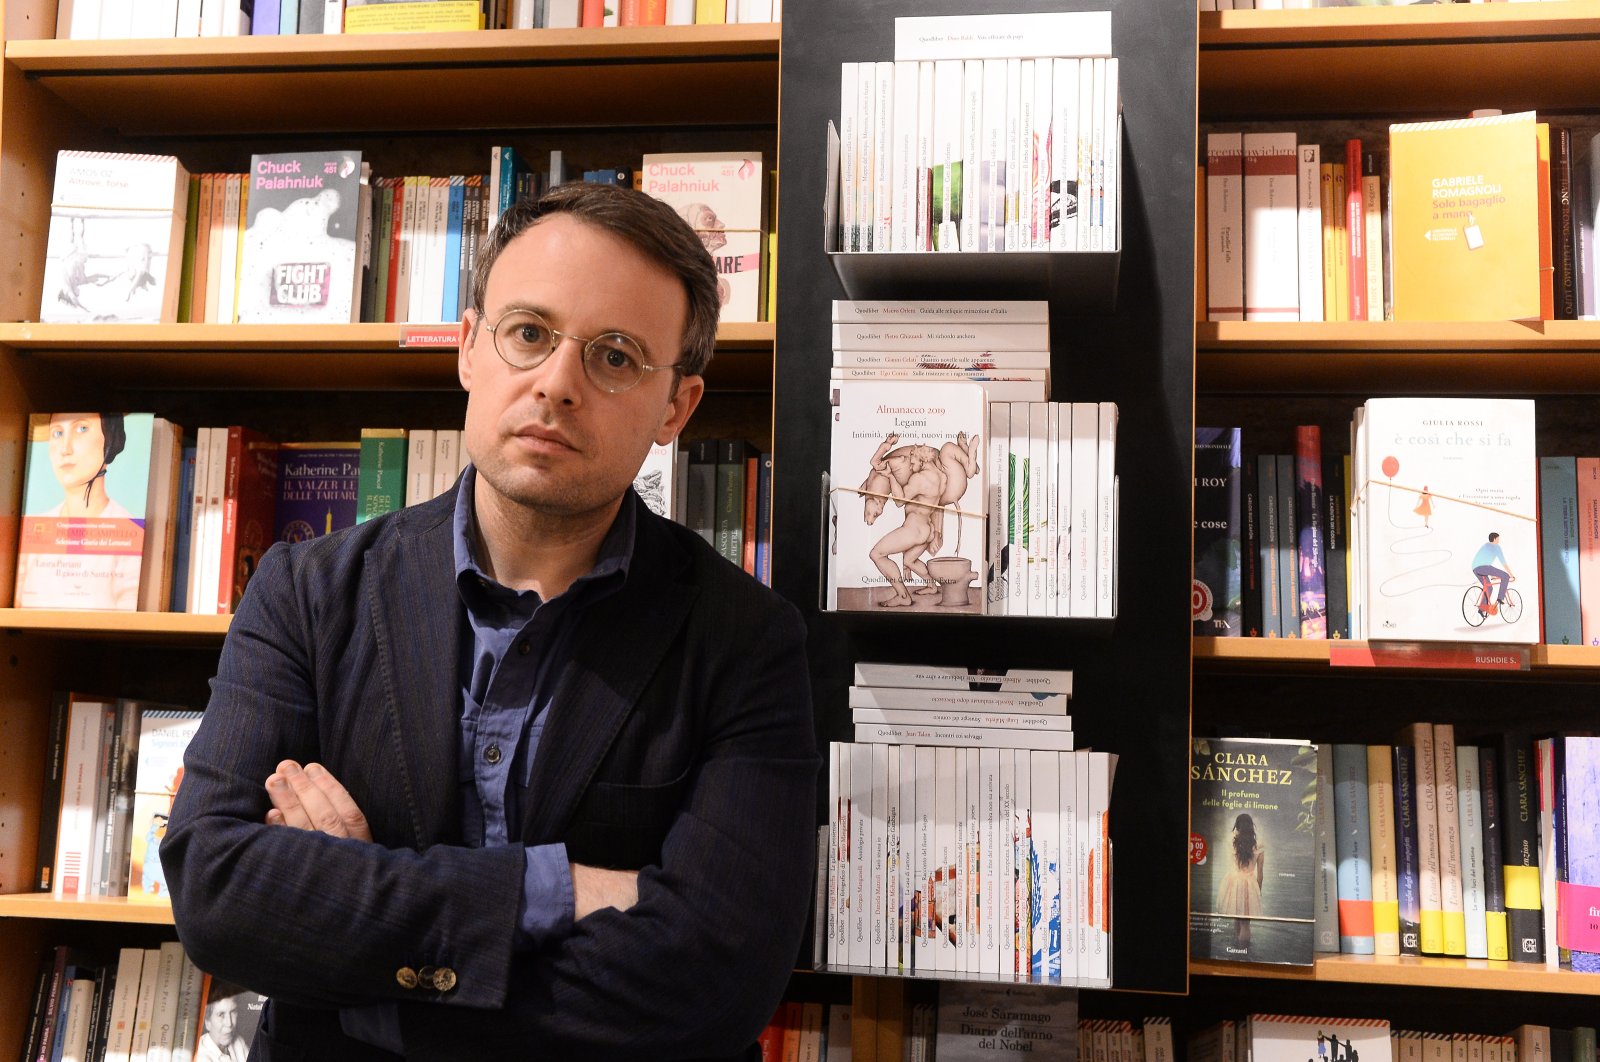 American author and writer Joshua Cohen attends the presentation of his latest book "Il Libro dei Numeri" ("Book of Numbers") at Coop Ambasciatori bookshop on Sept. 5, 2019, in Bologna, Italy. (Getty Images)